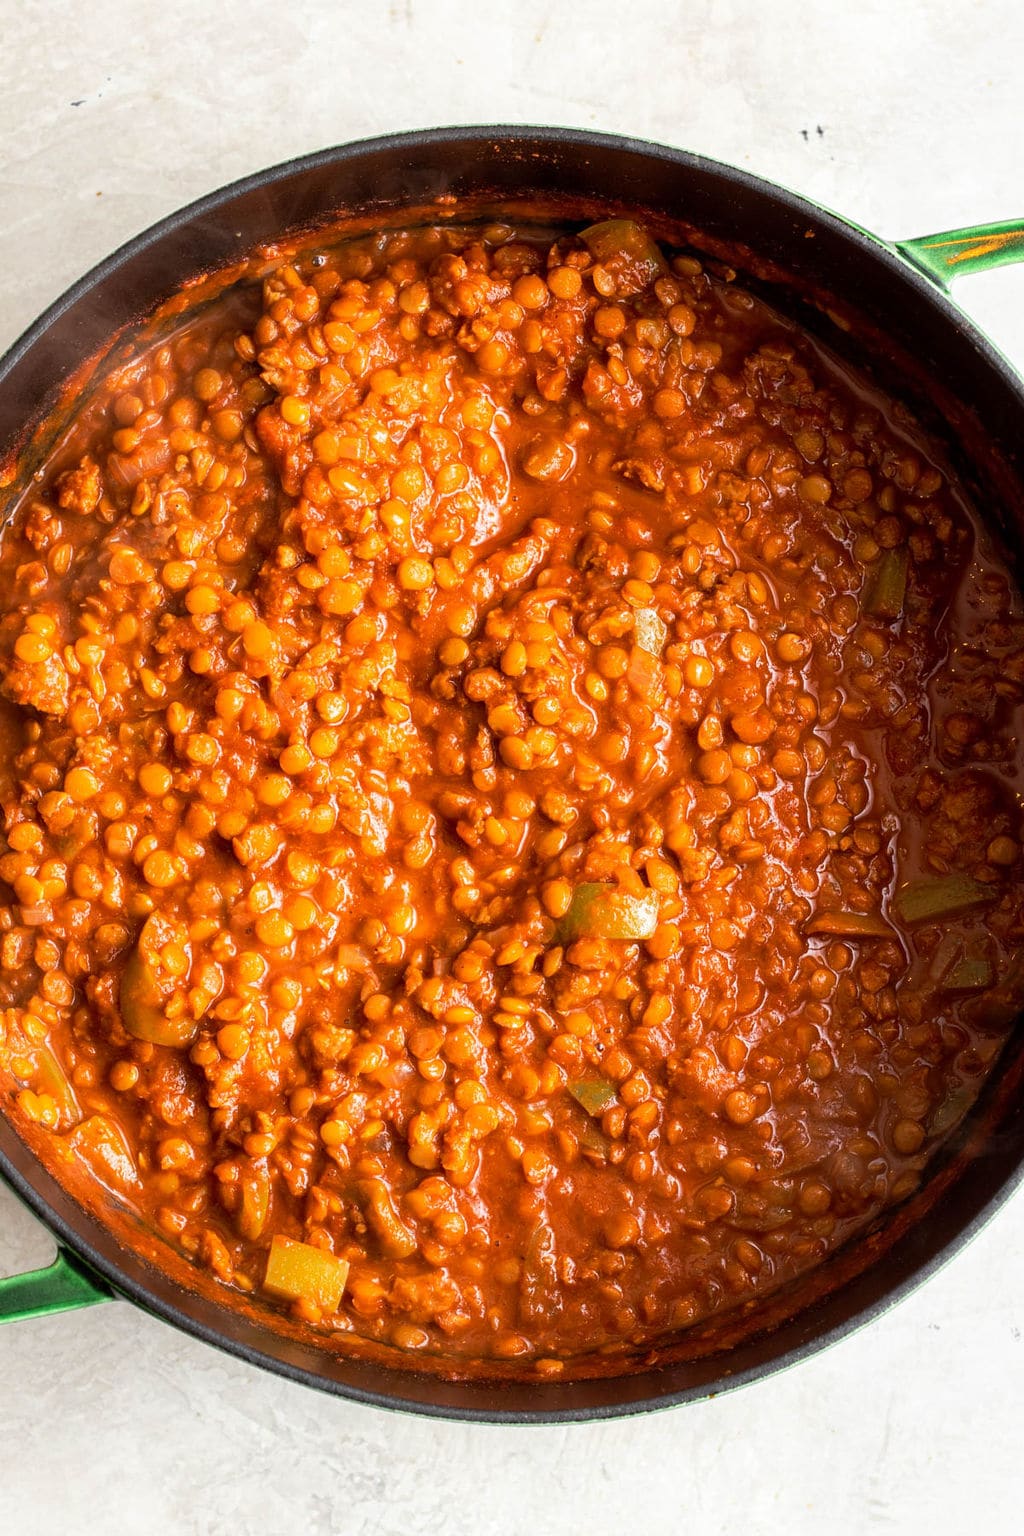 a large black pot filled with cooked lentils and tomato sauce.